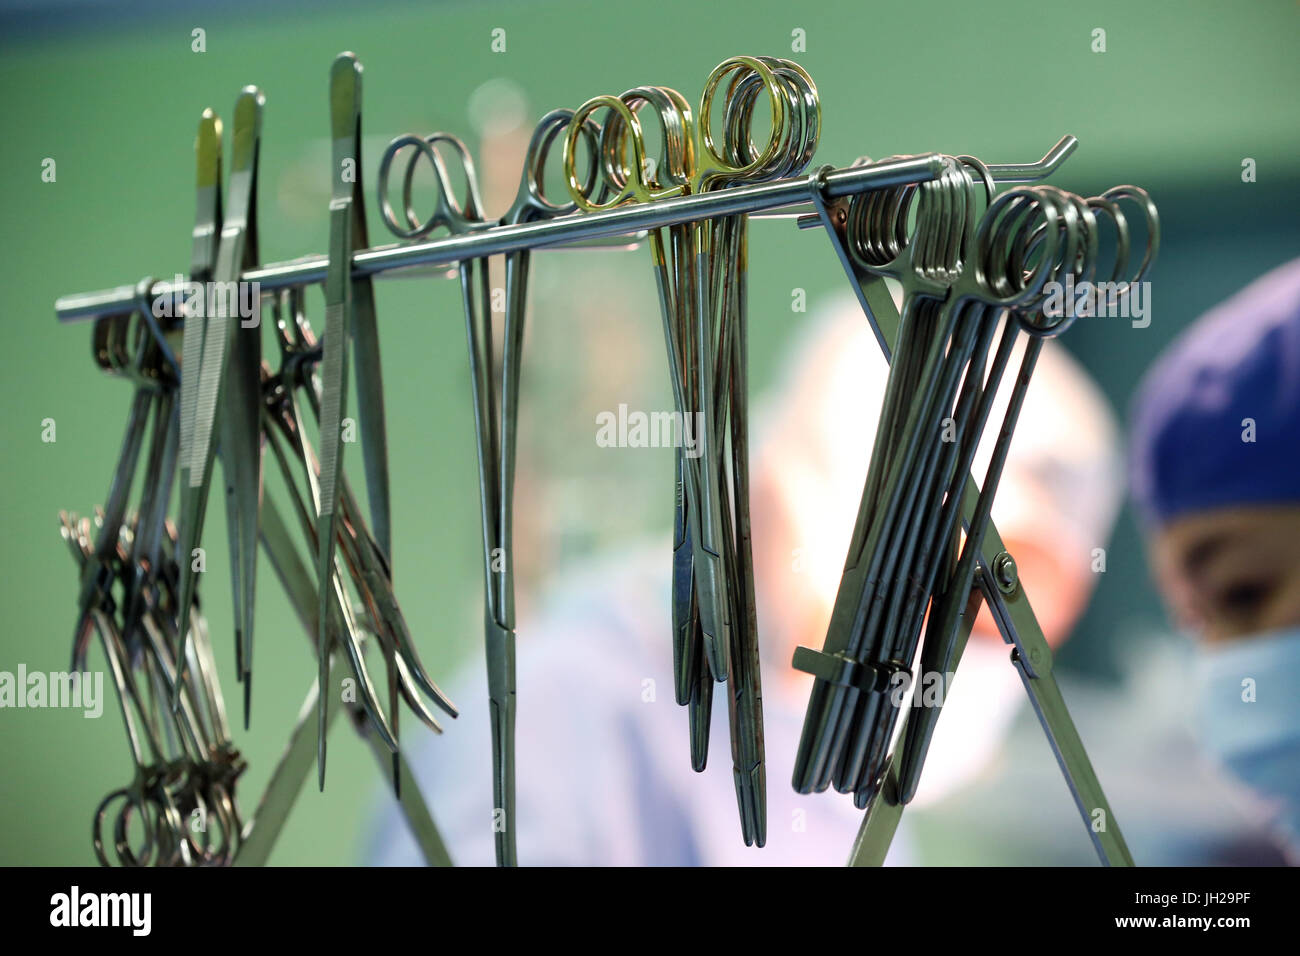 Operating theater. Cardiac surgery. Surgical instruments.  Ho Chi Minh City. Vietnam. Stock Photo